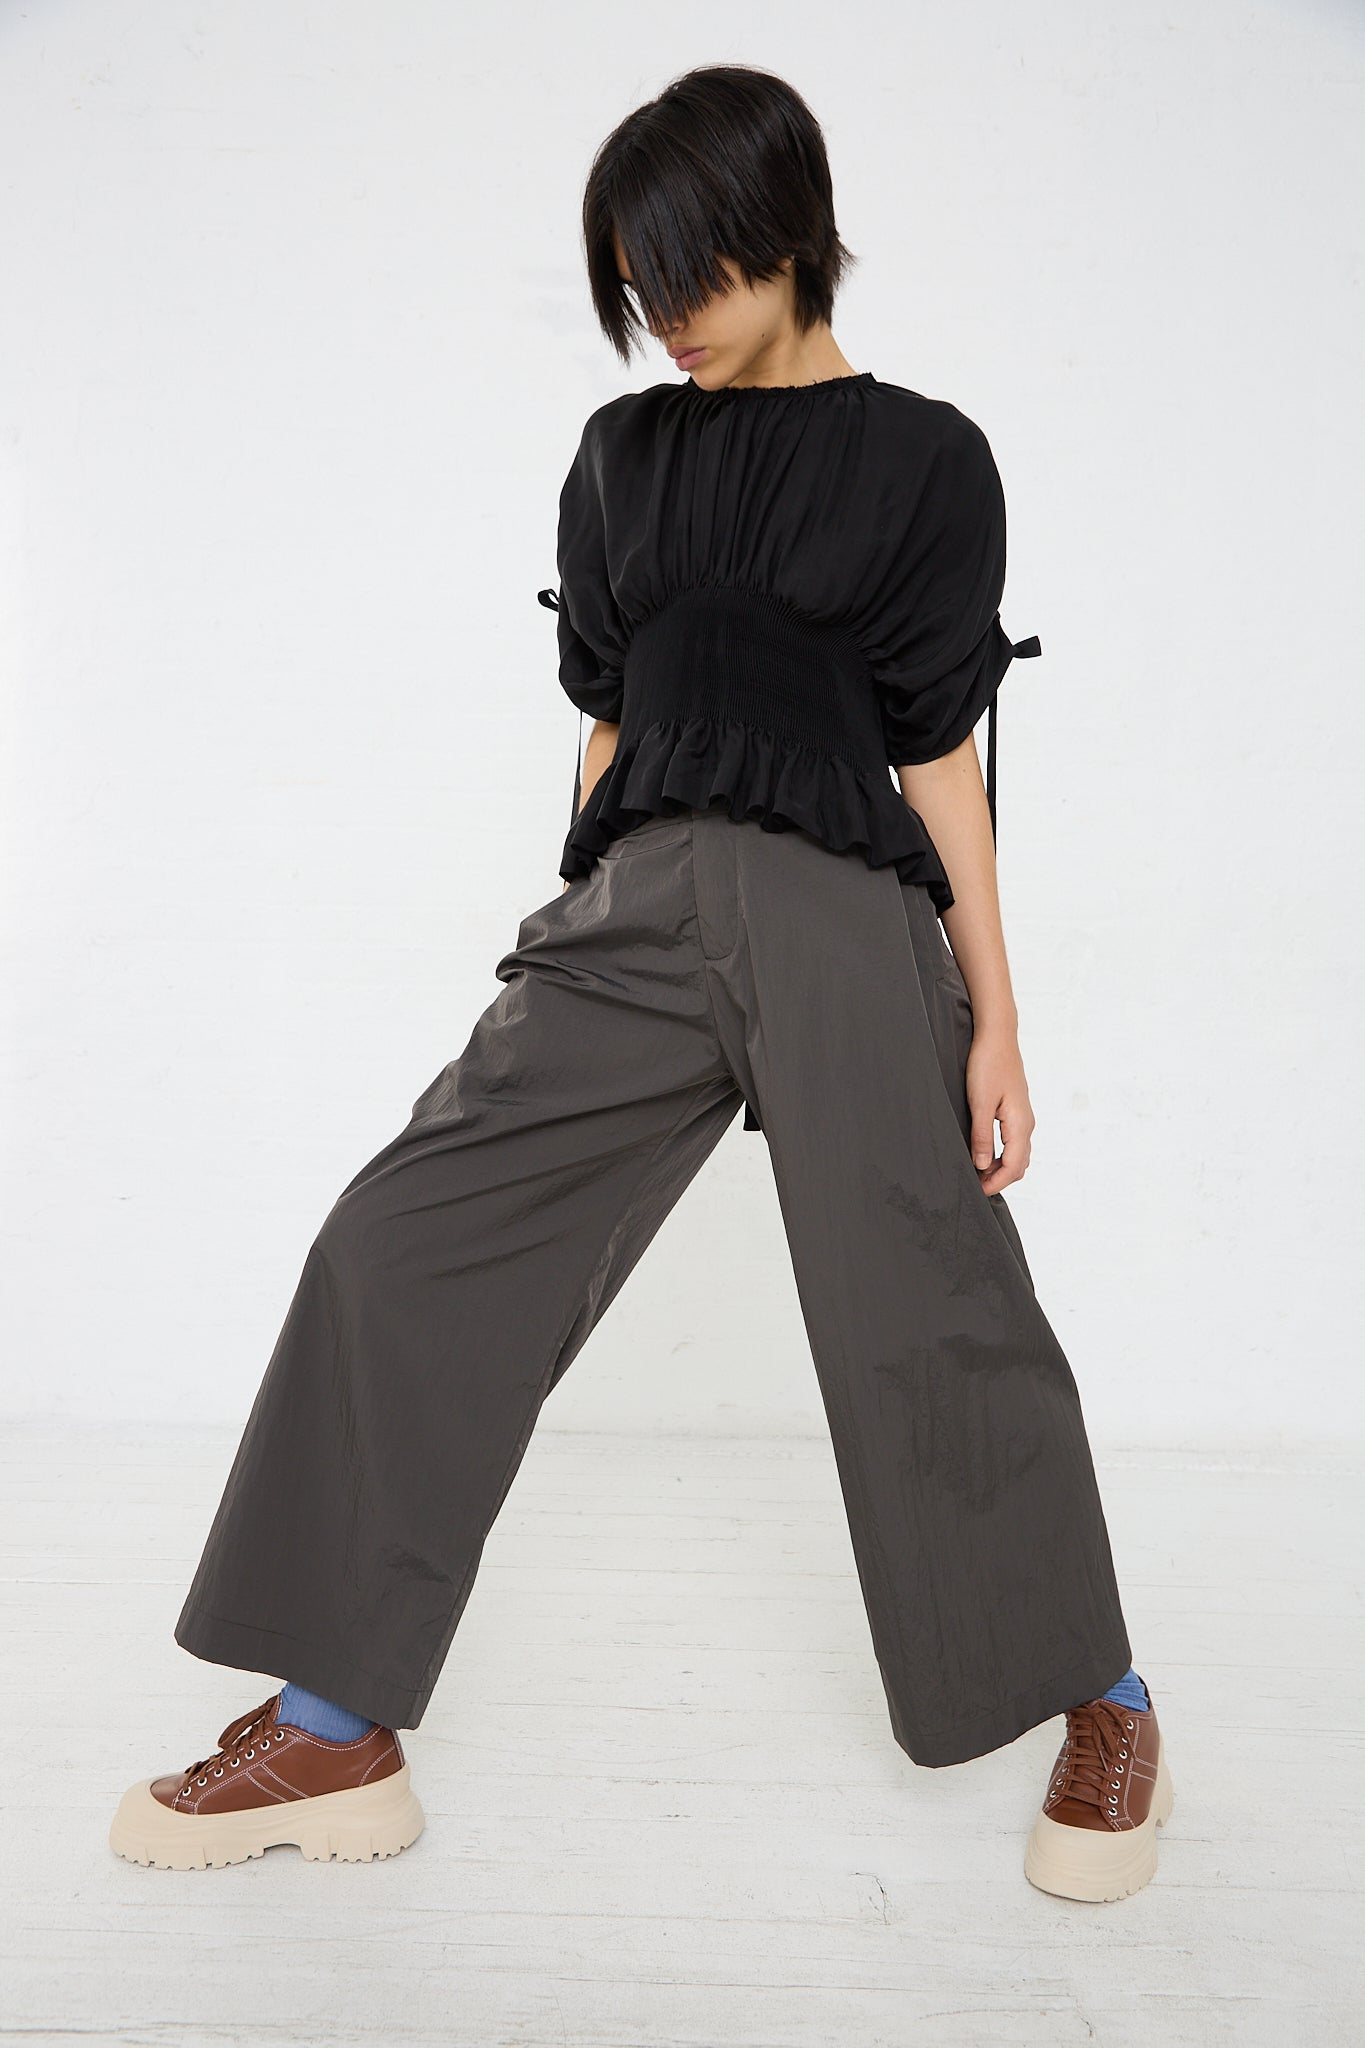 A woman wearing a black top and Renata Brenha's Mare Trouser in Deep Grey wide leg pants.